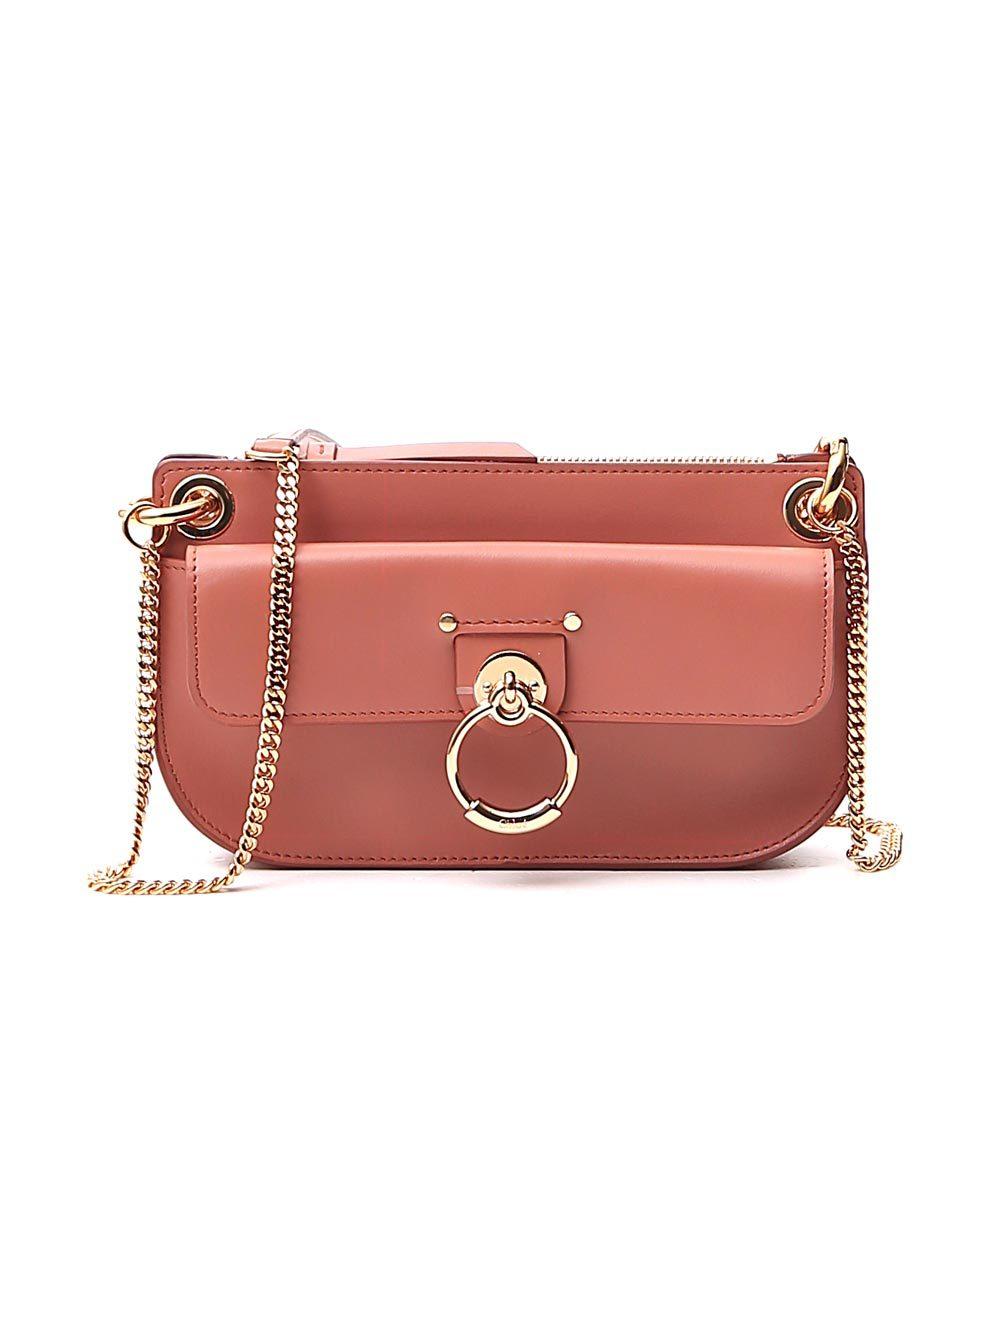 Chloé Leather Mini Tess Crossbody Bag in Pink (Red) - Lyst